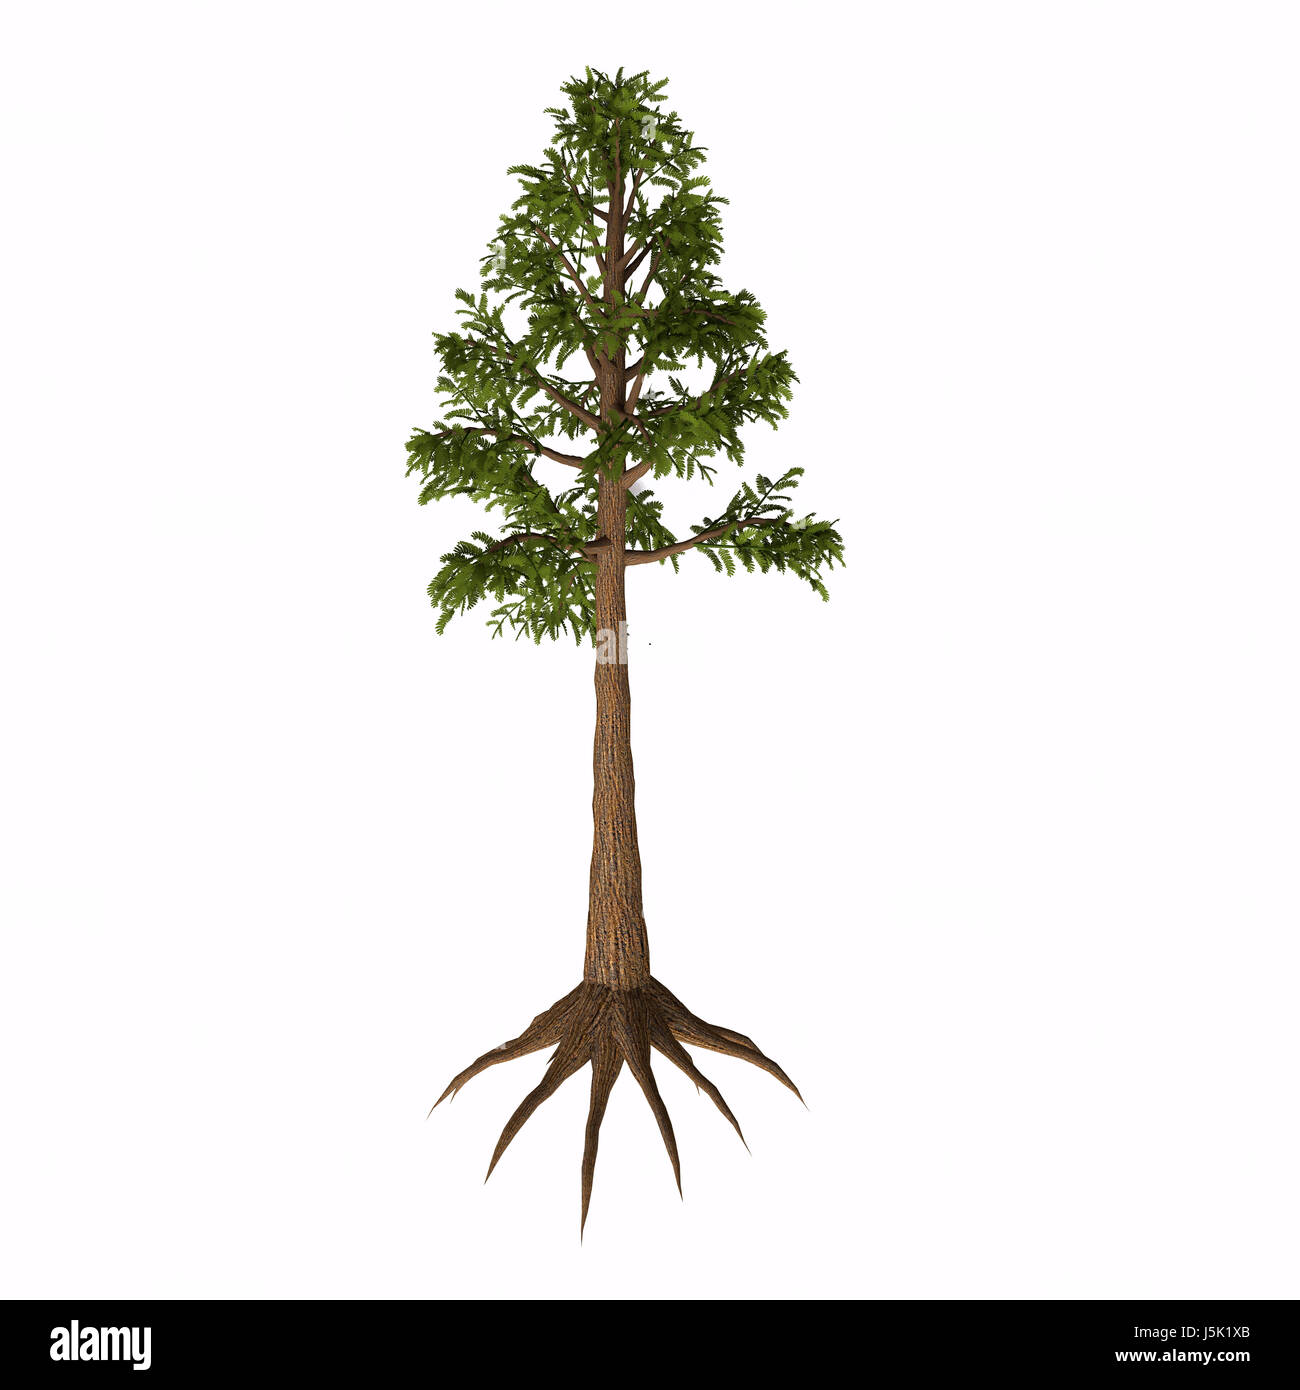 Archaeopteris sp Tree Archaeopteris is an extinct genus of tree-like plants with fern-like leaves that lived in the Devonian to Carboniferous Periods. Stock Photo